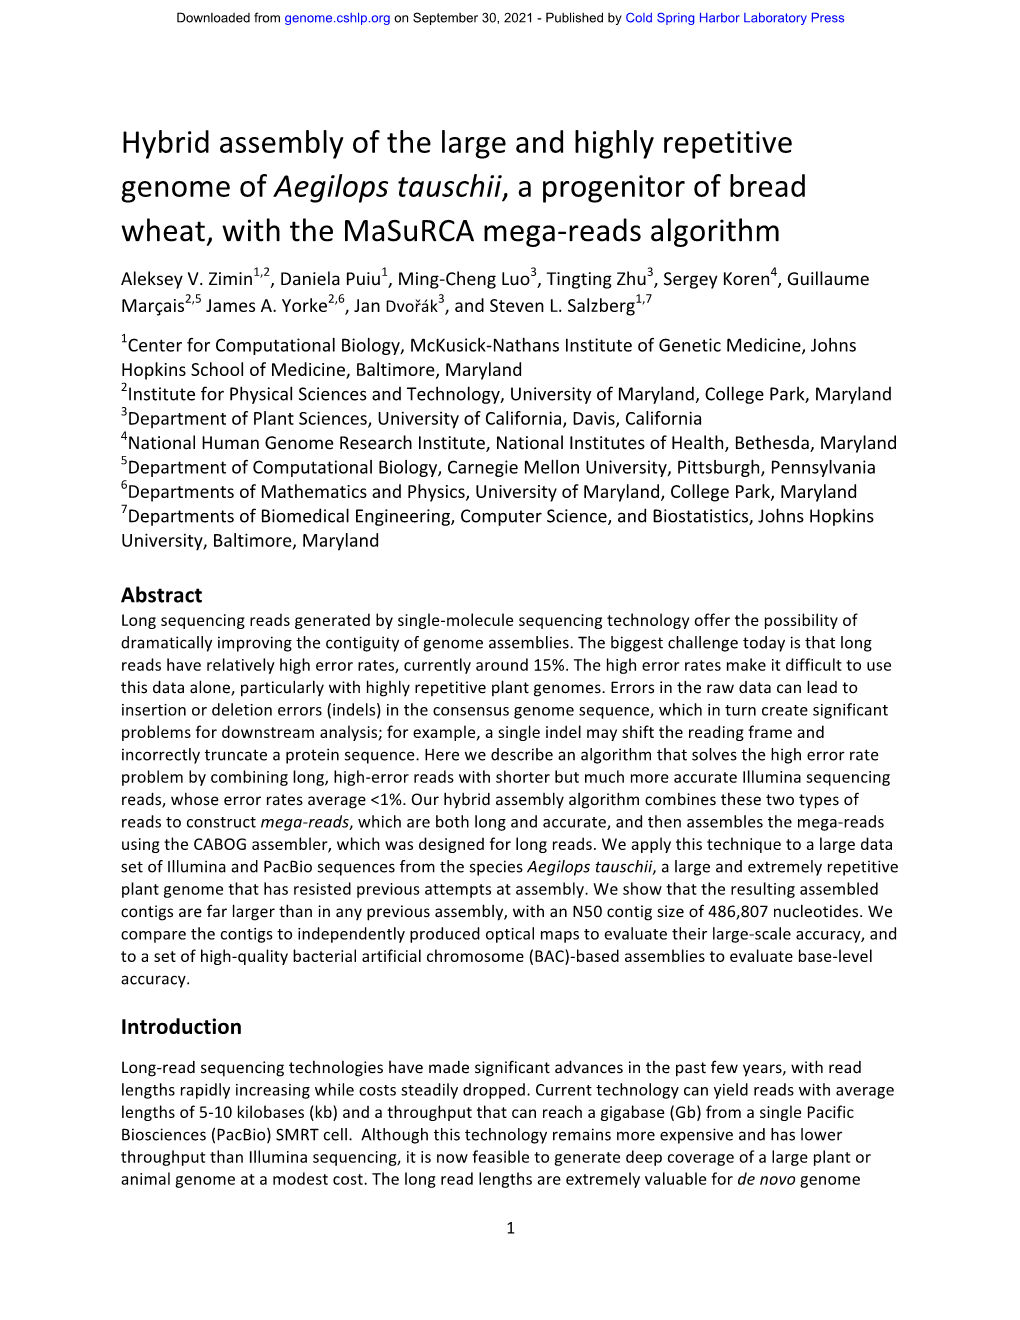 Hybrid Assembly of the Large and Highly Repetitive Genome of Aegilops Tauschii, a Progenitor of Bread Wheat, with the Masurca Mega-Reads Algorithm